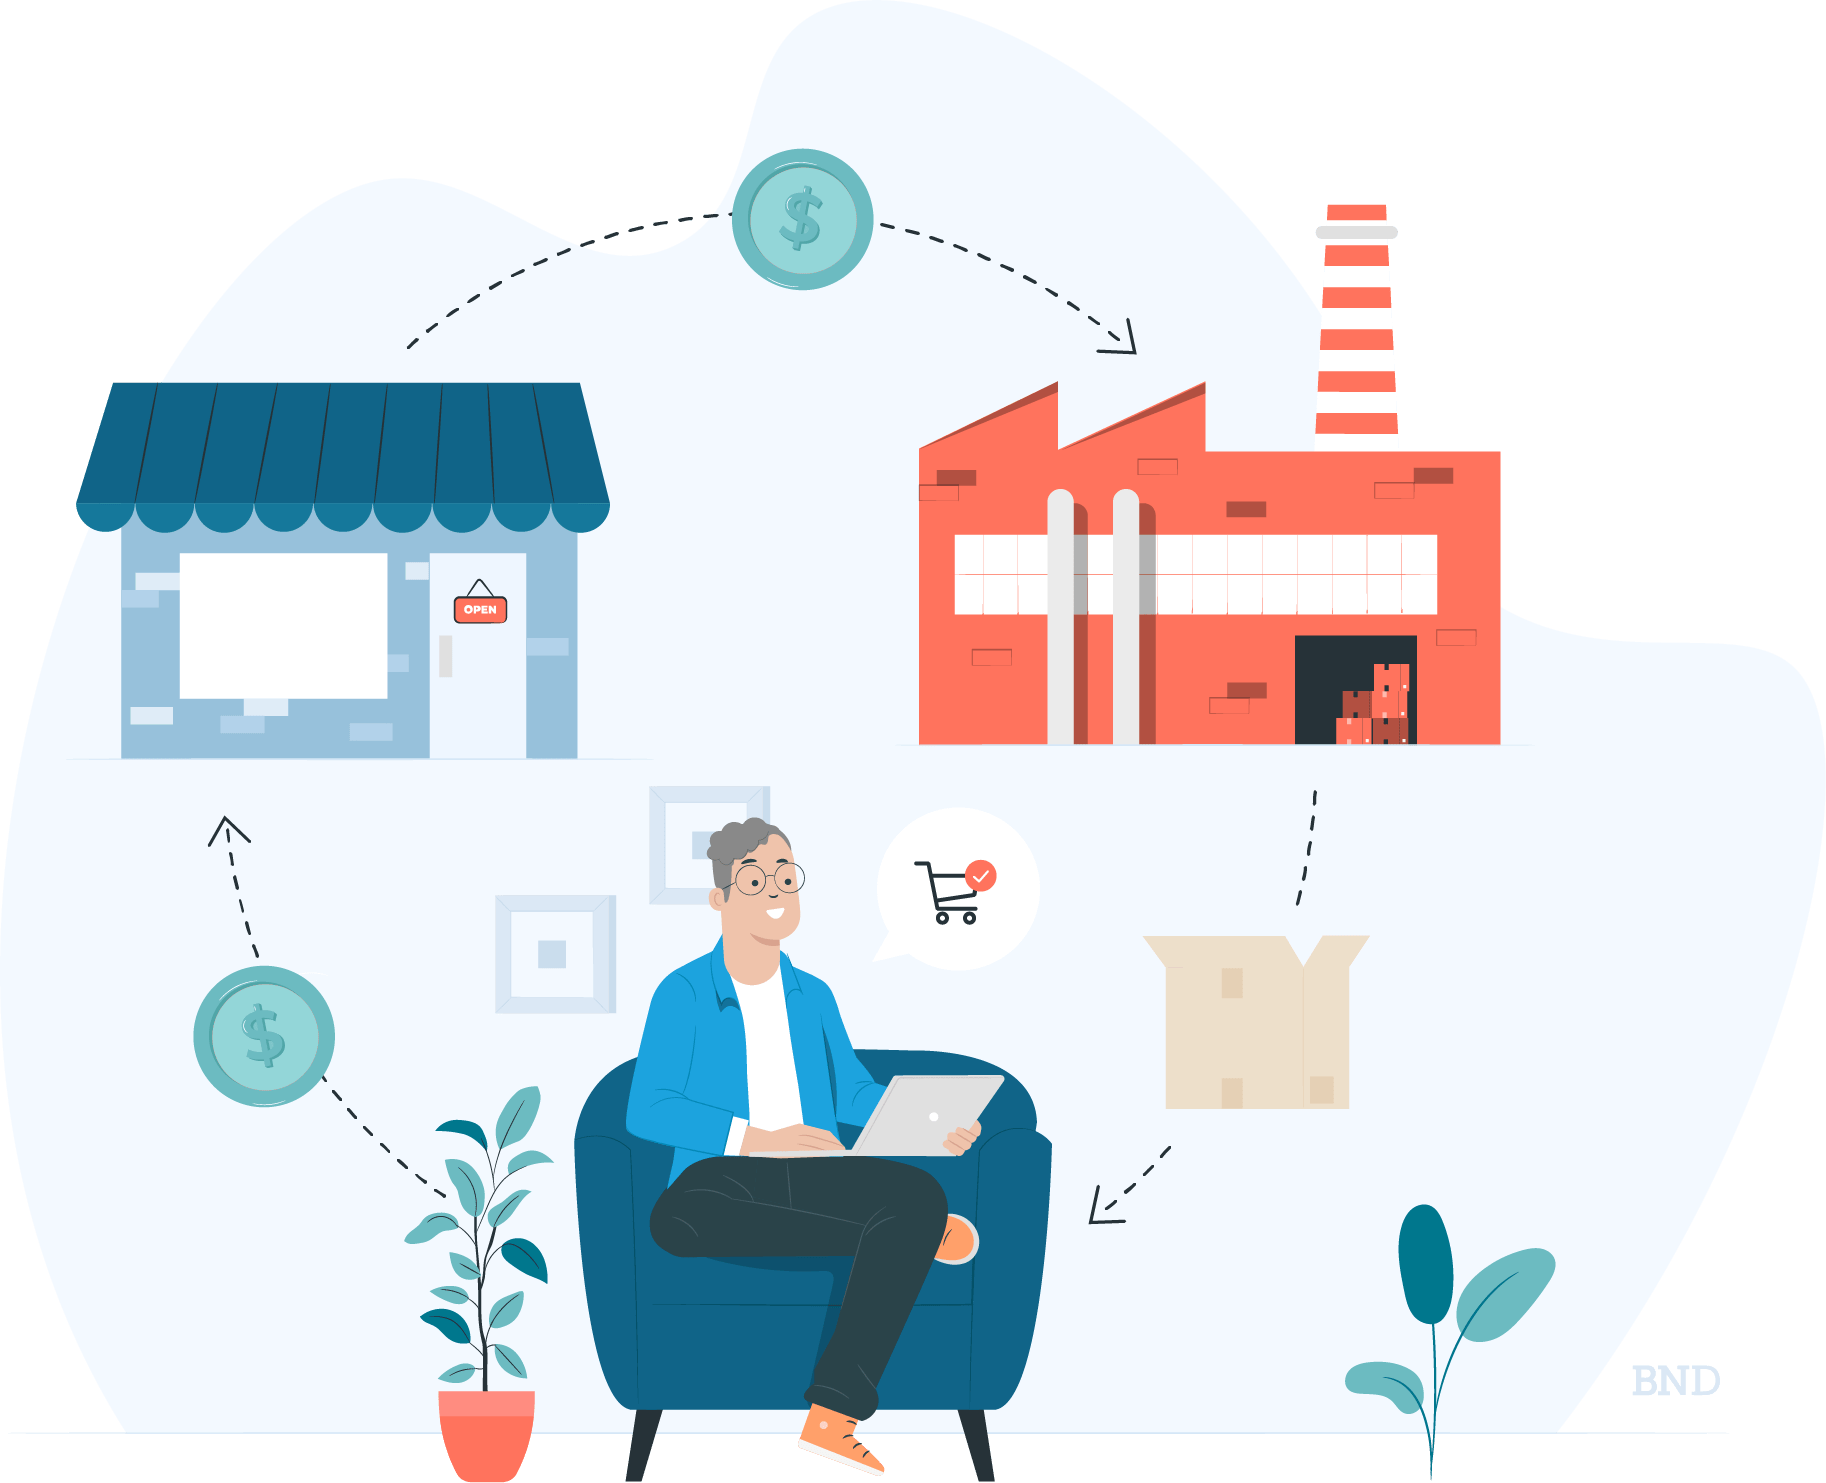 Dropshipping Small business idea | Image Source : businessnewdaily.com